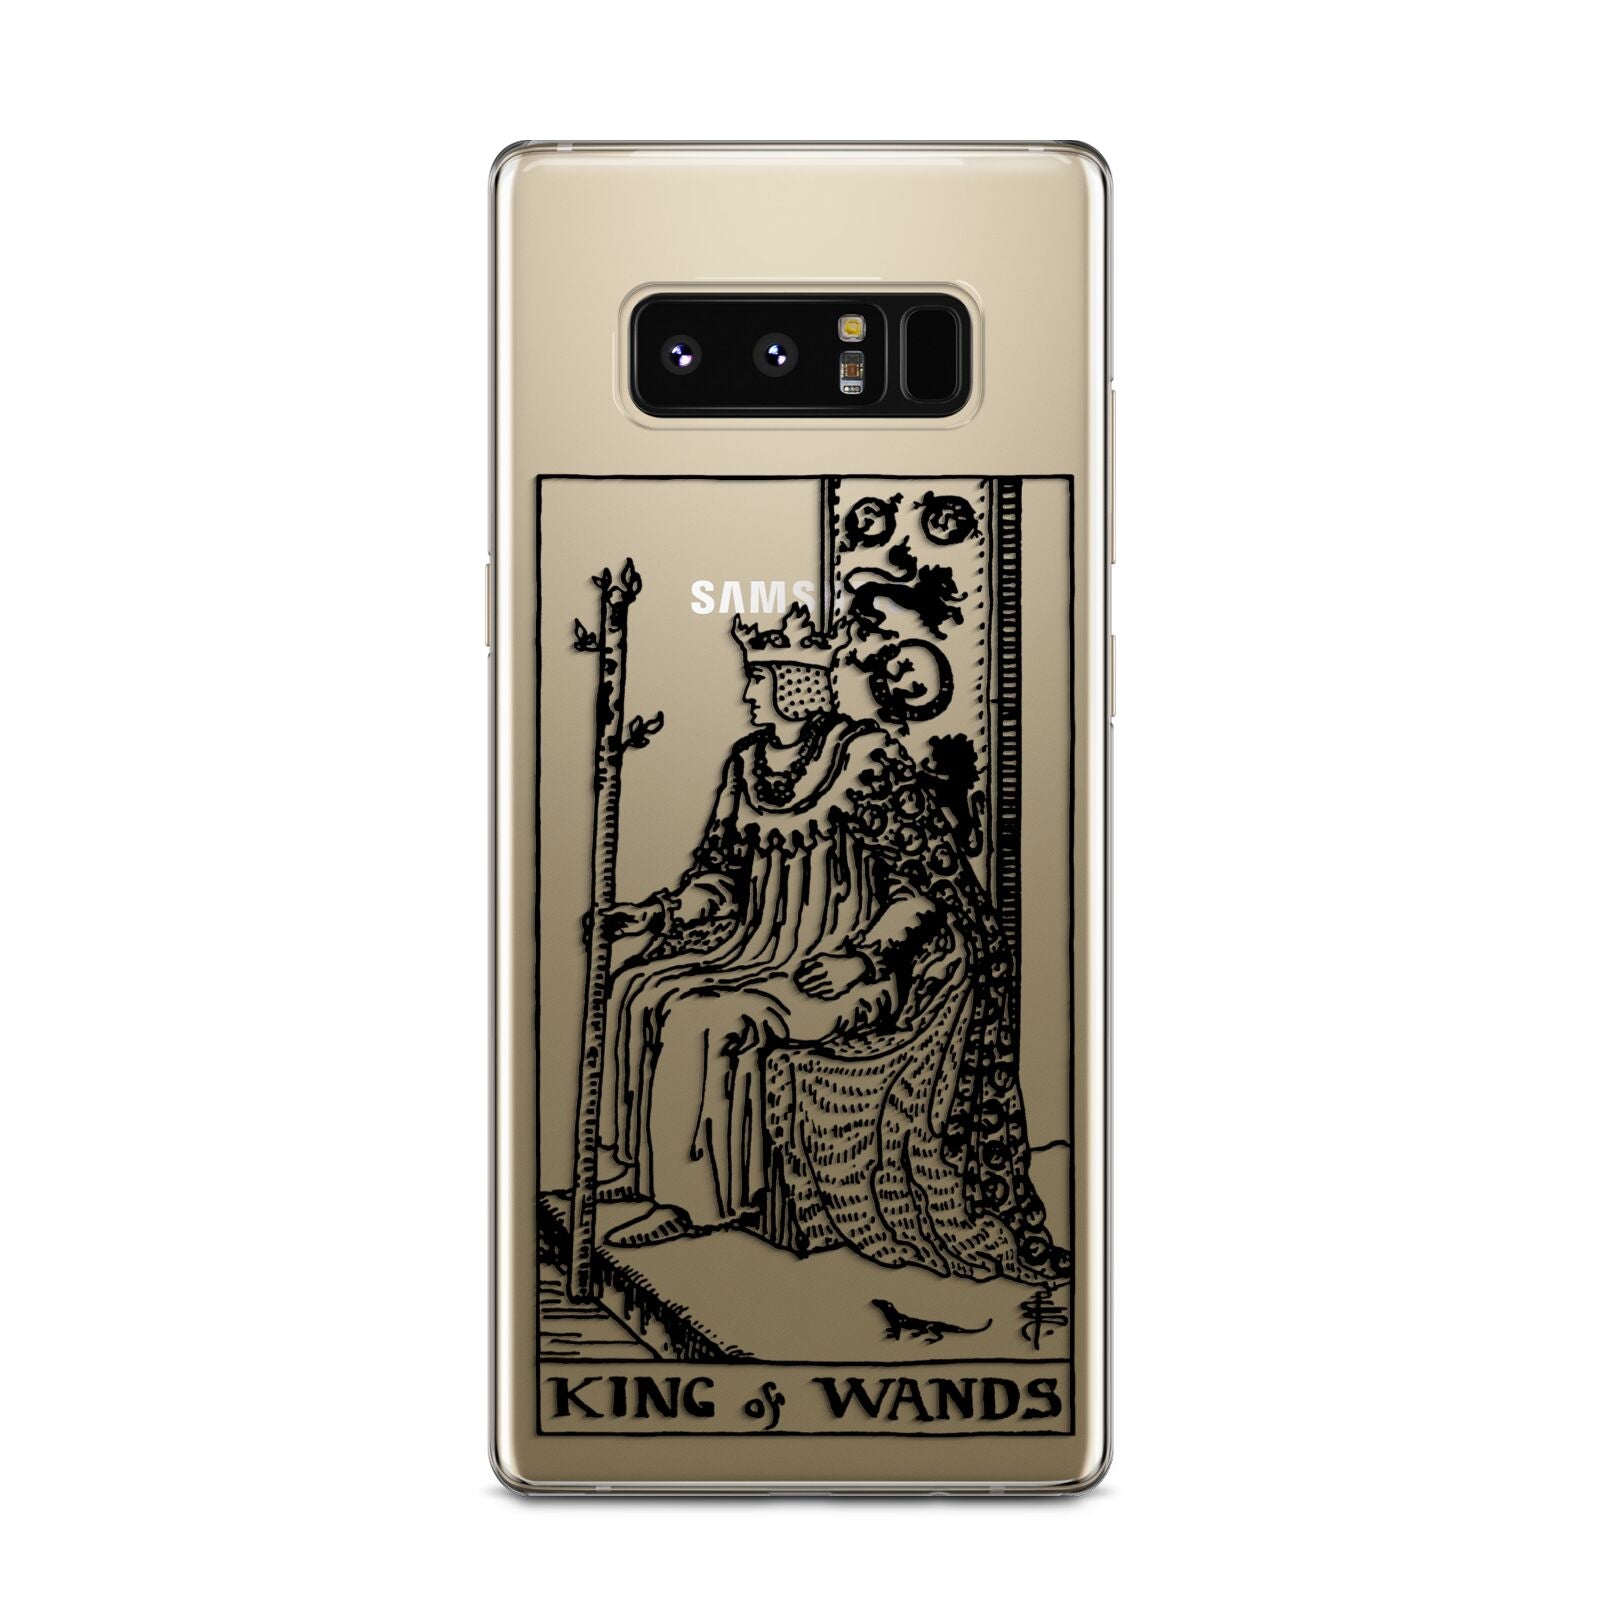 King of Wands Monochrome Samsung Galaxy Note 8 Case